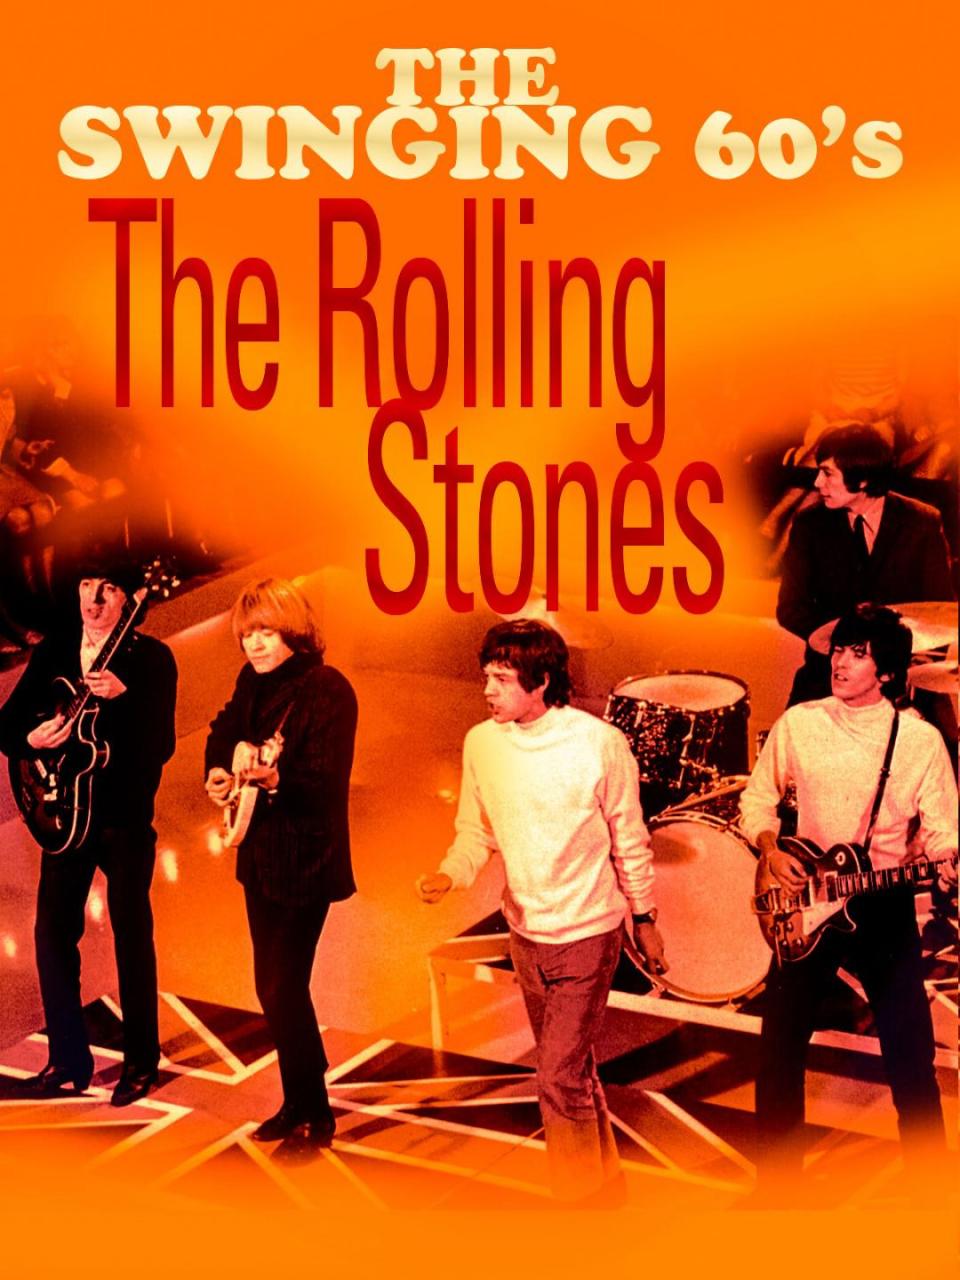 The Swinging 60's -The Rolling Stones